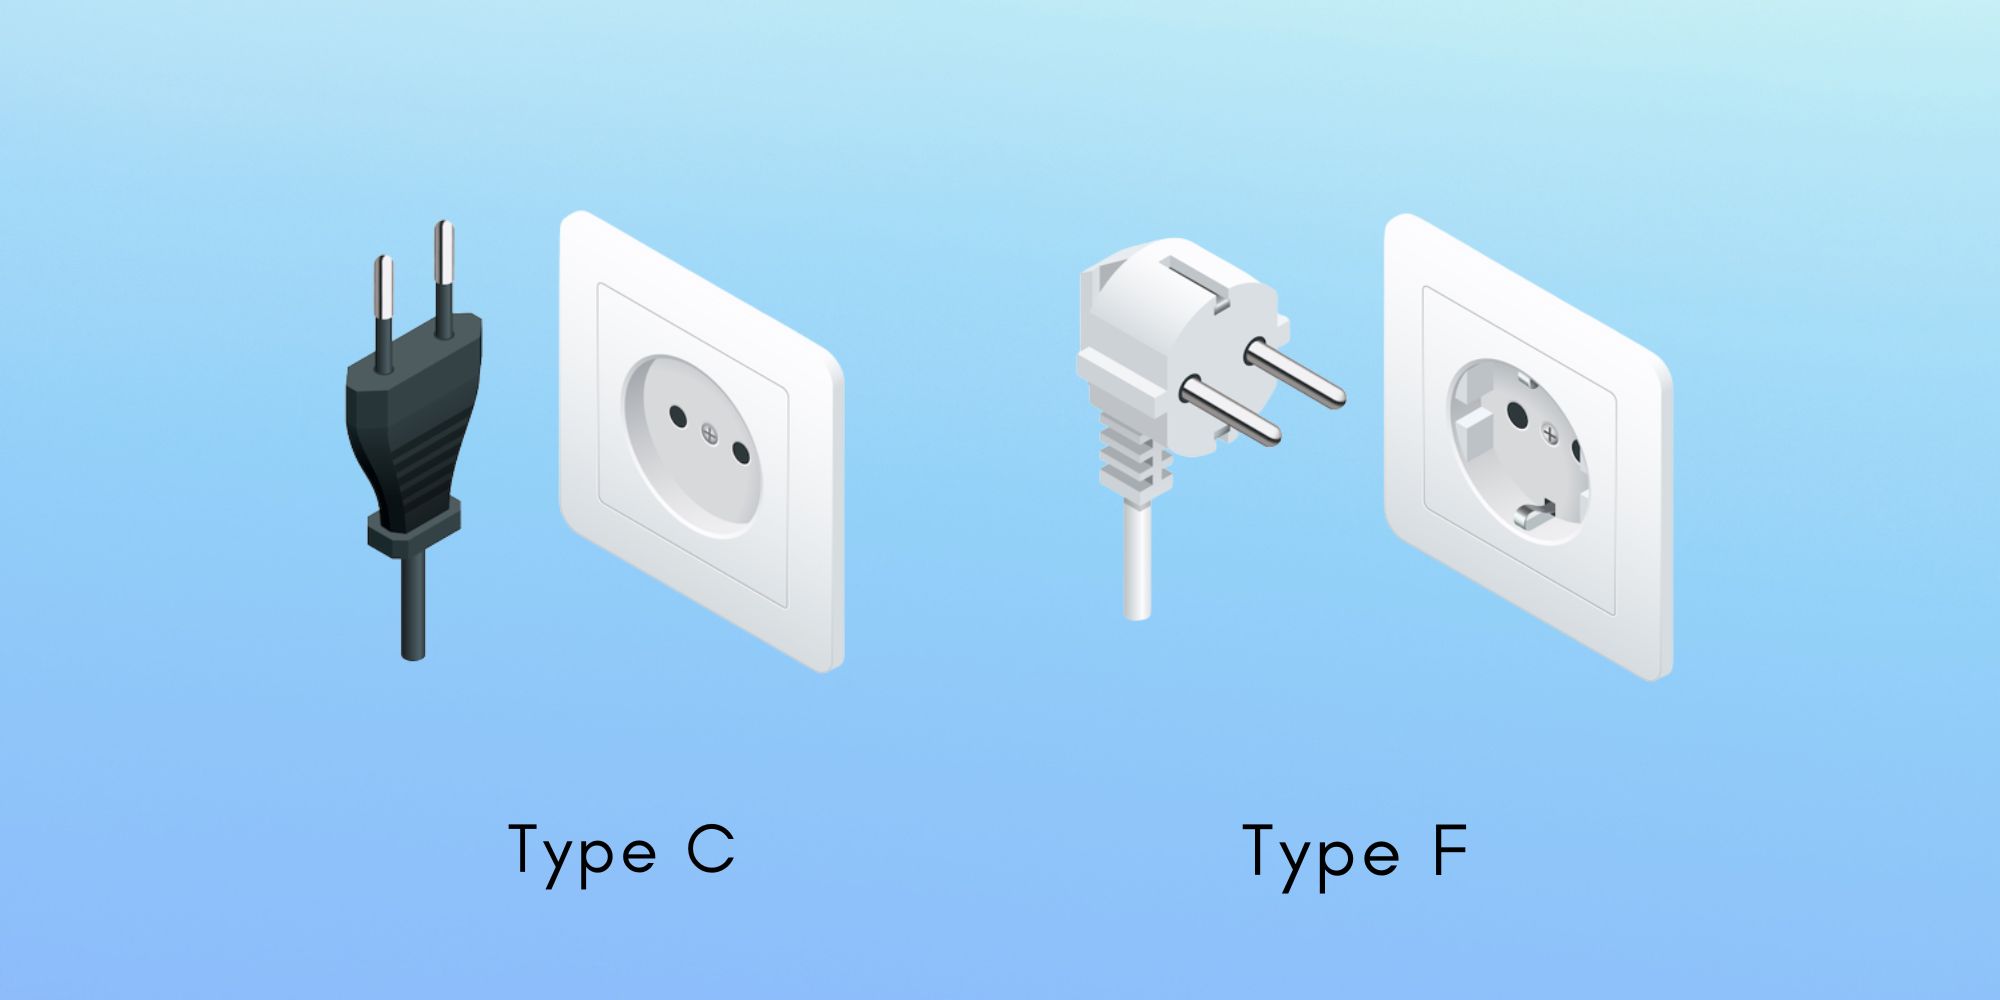 São Tomé and Príncipe Power Plugs and Sockets: Type C and Type F
